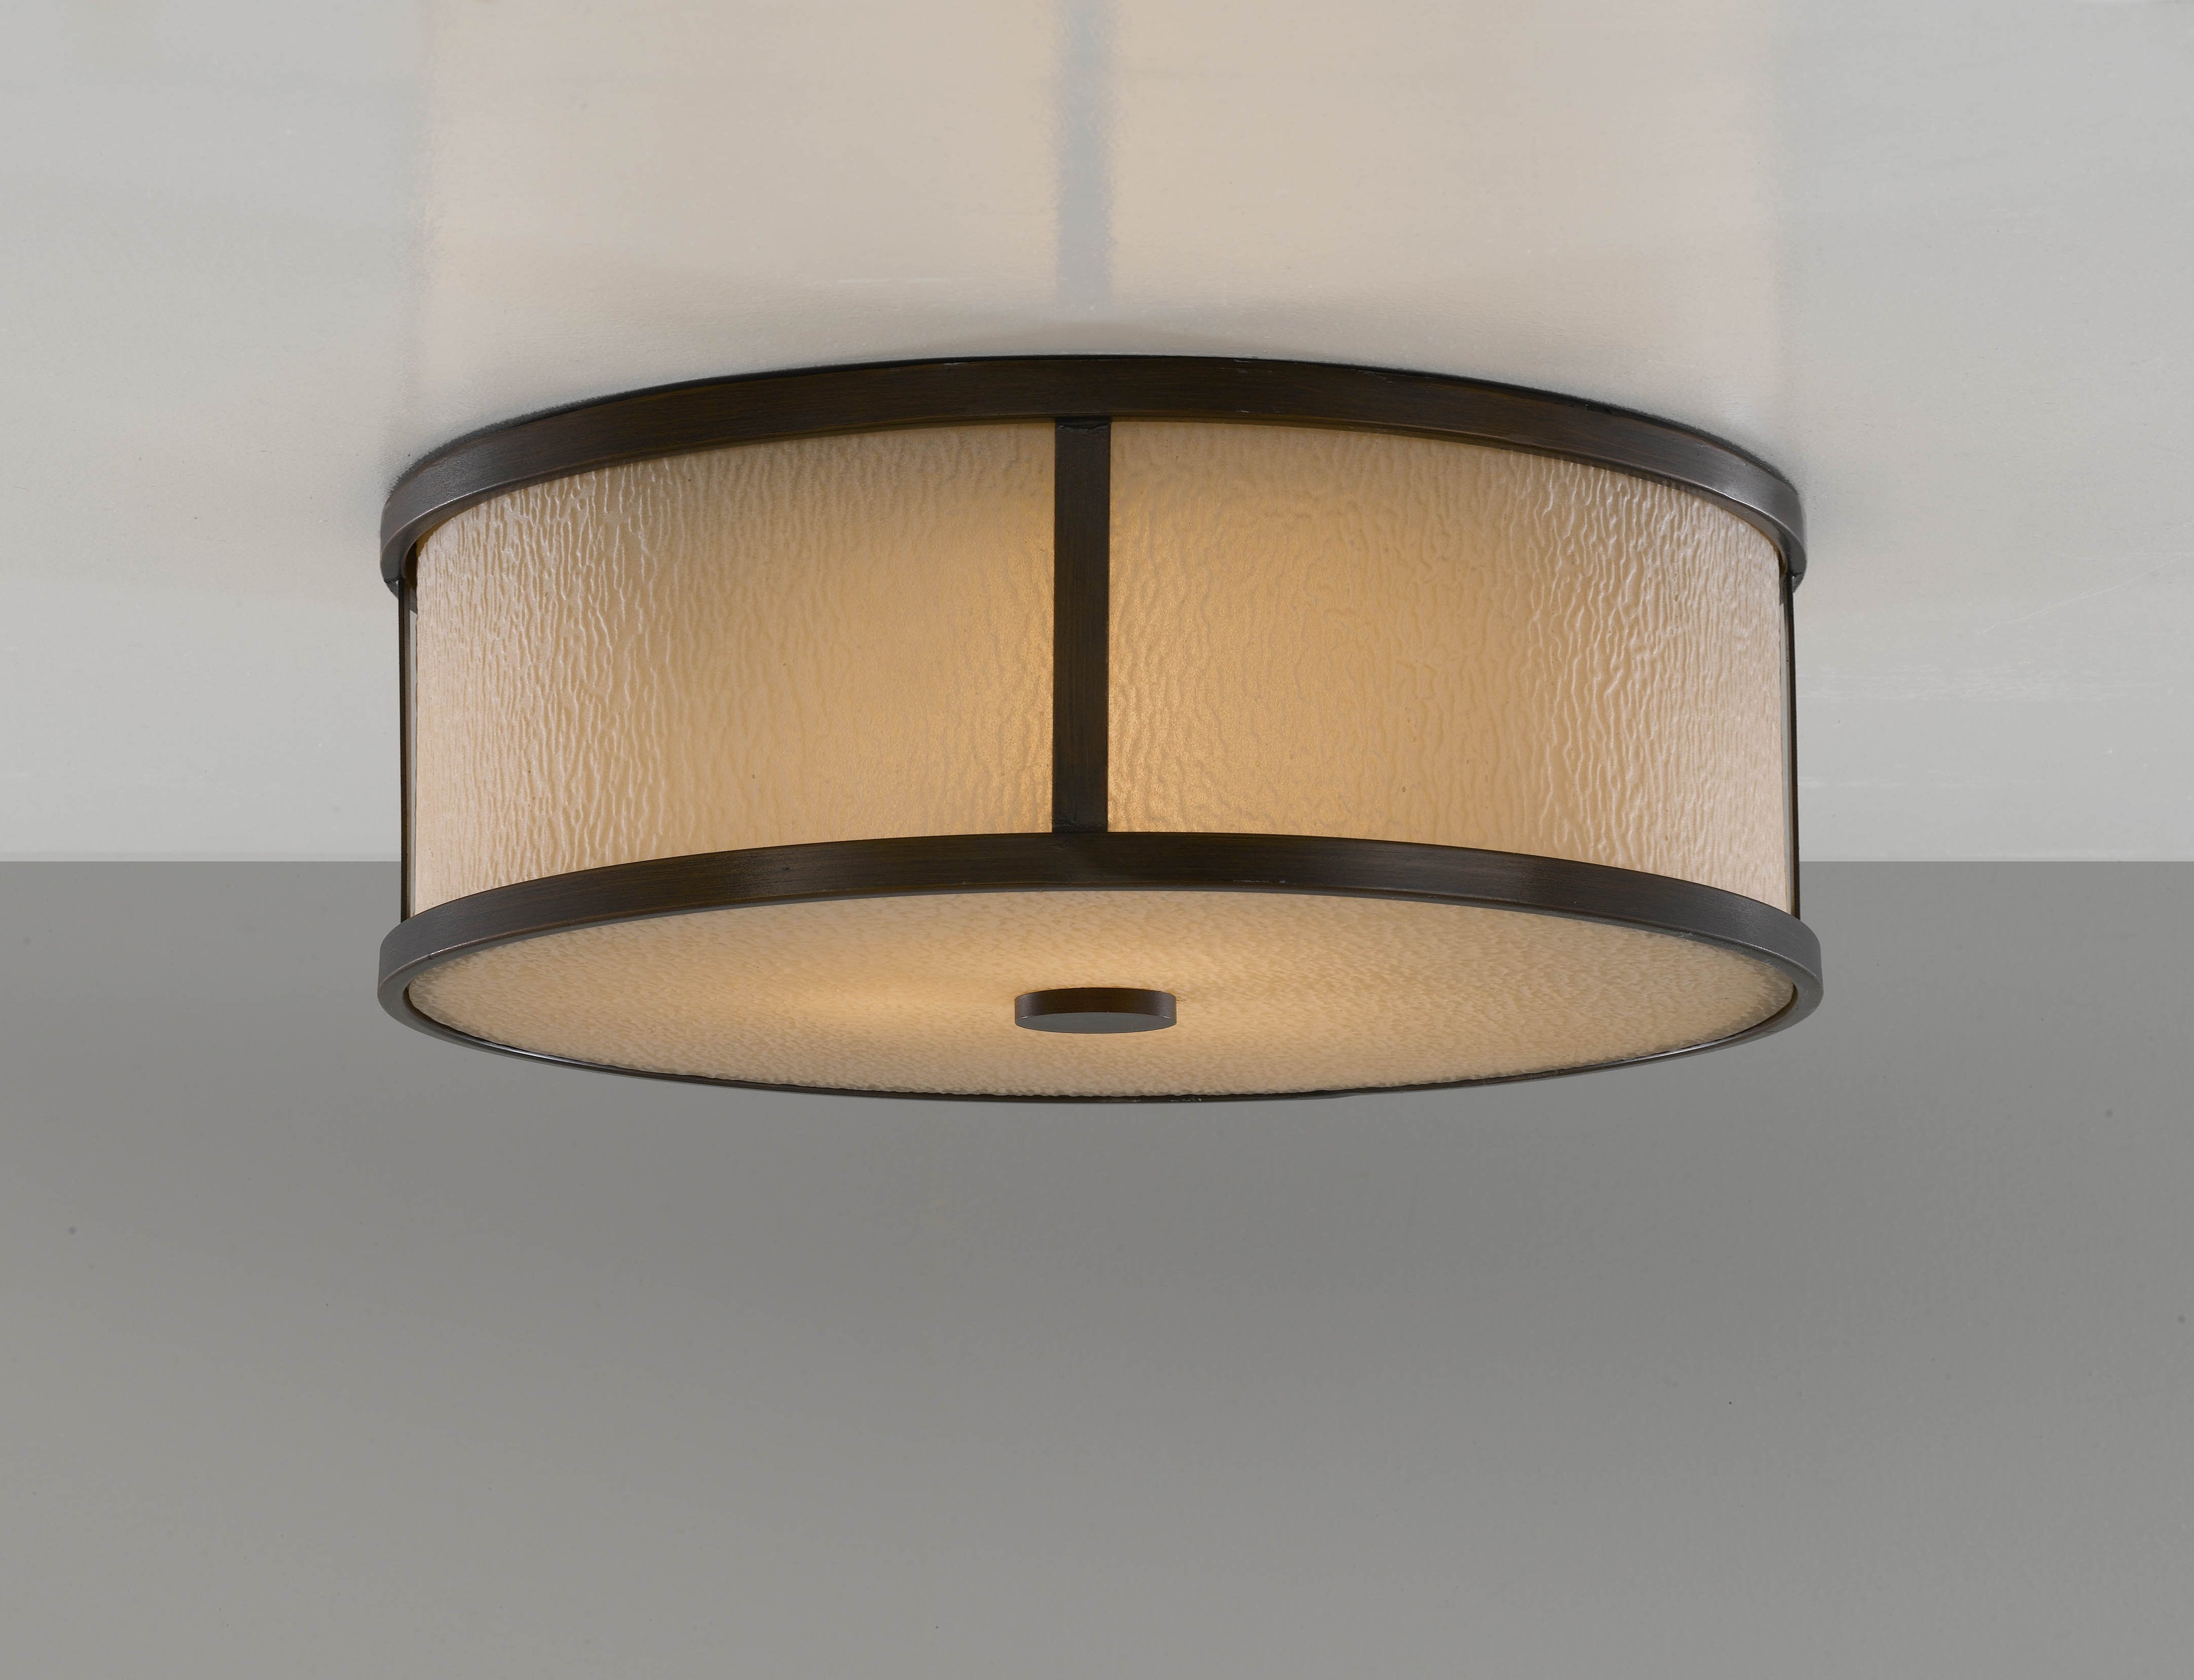 Ceiling Mounted Light Fixtures